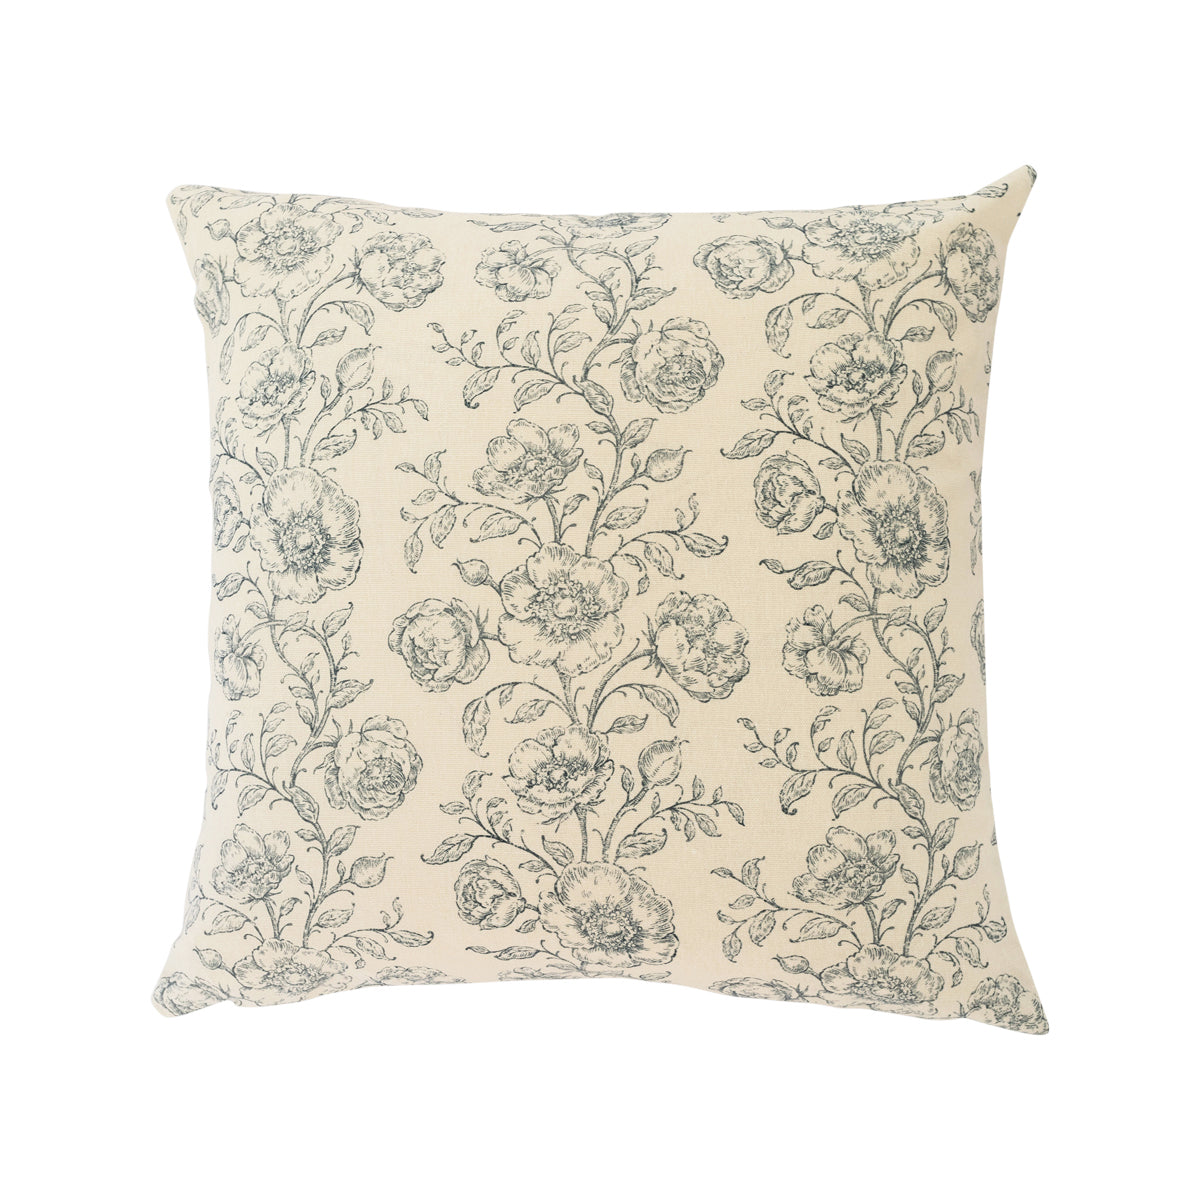 Mabel Pillow Cover - Sky Blue